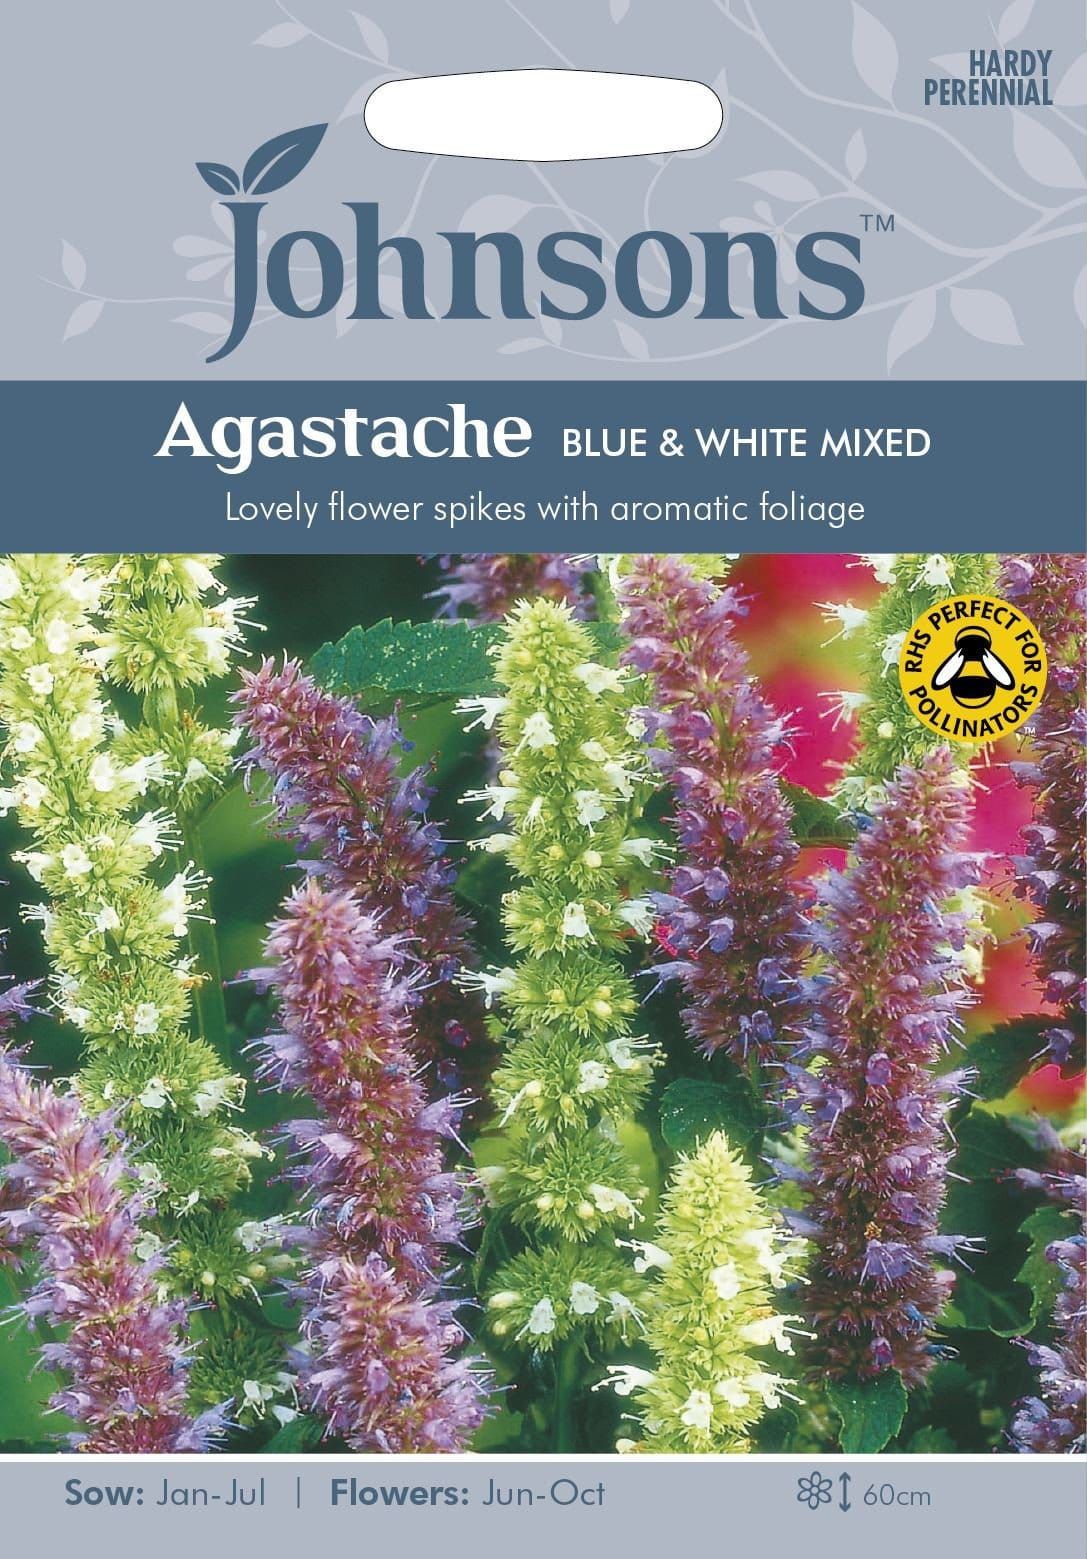 Johnsons Agastache Blue & White Mixed 200 Seeds